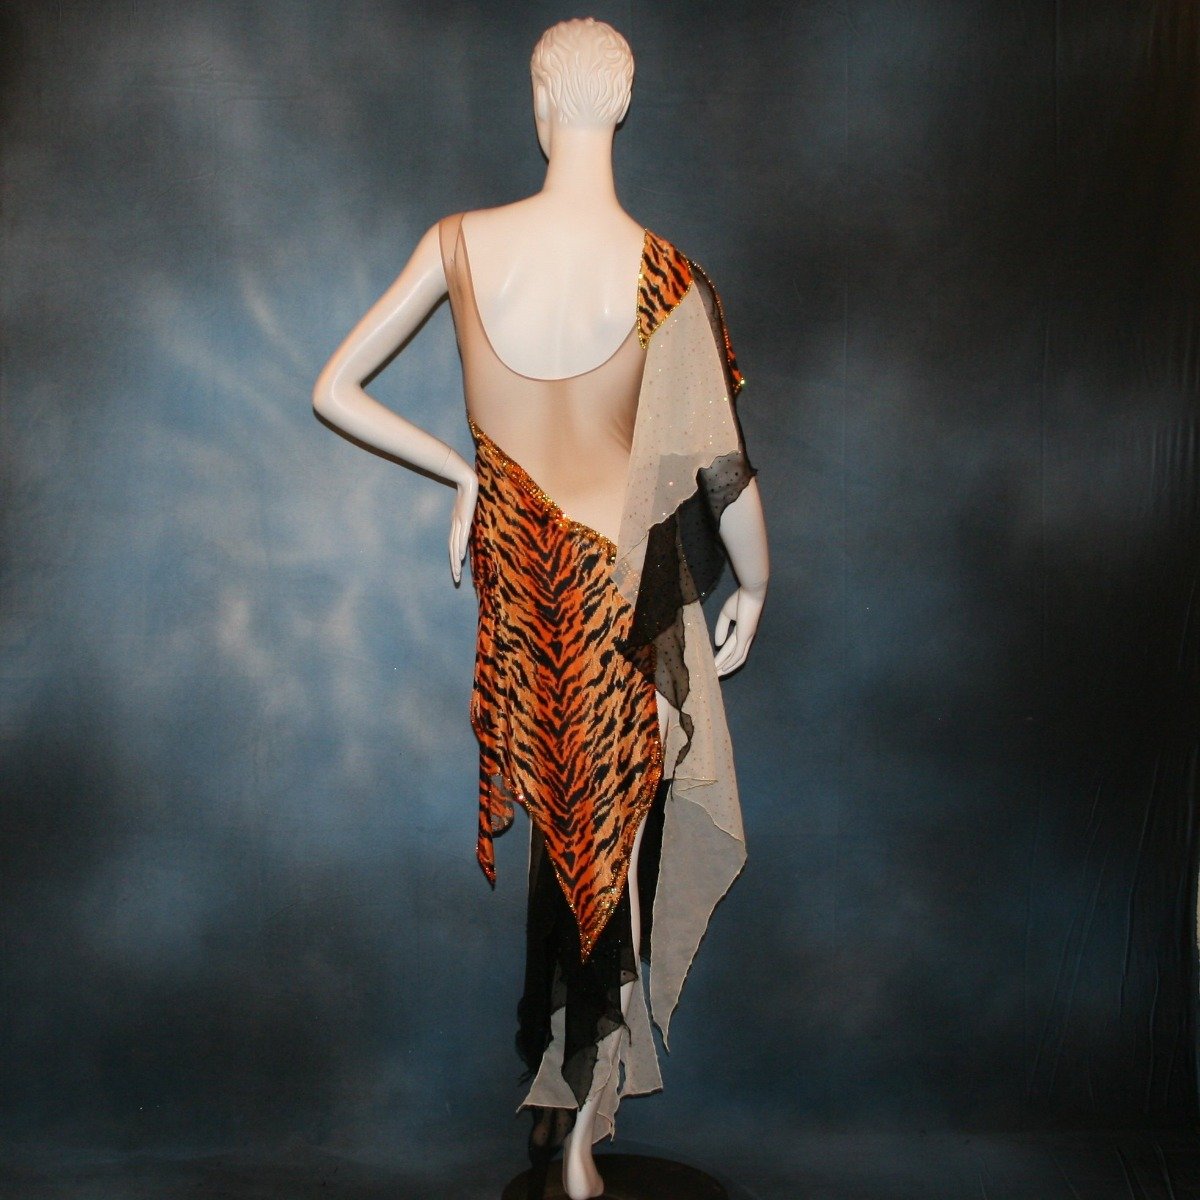 Crystal's Creations back view of tiger print Latin/rhythm dress with pale yellow accents